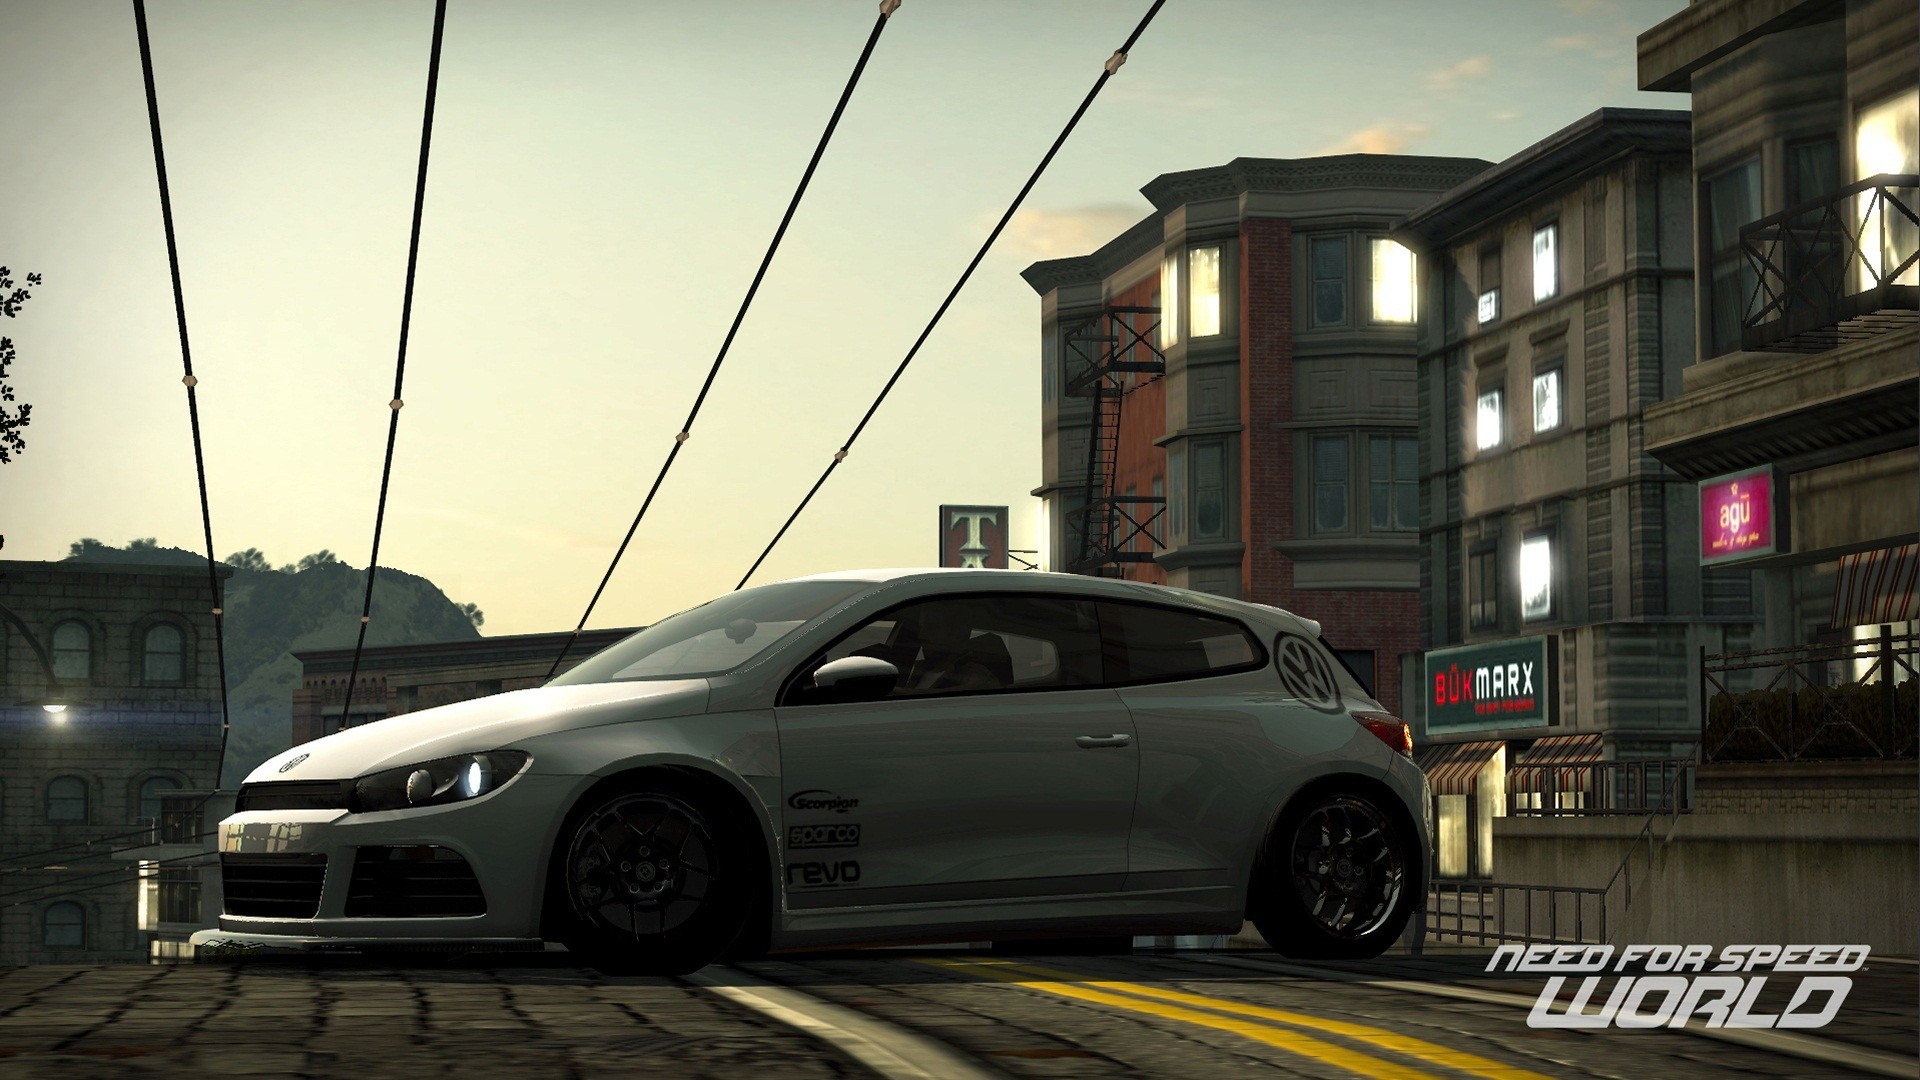 Need For Speed: Shift, Scirocco Wallpaper